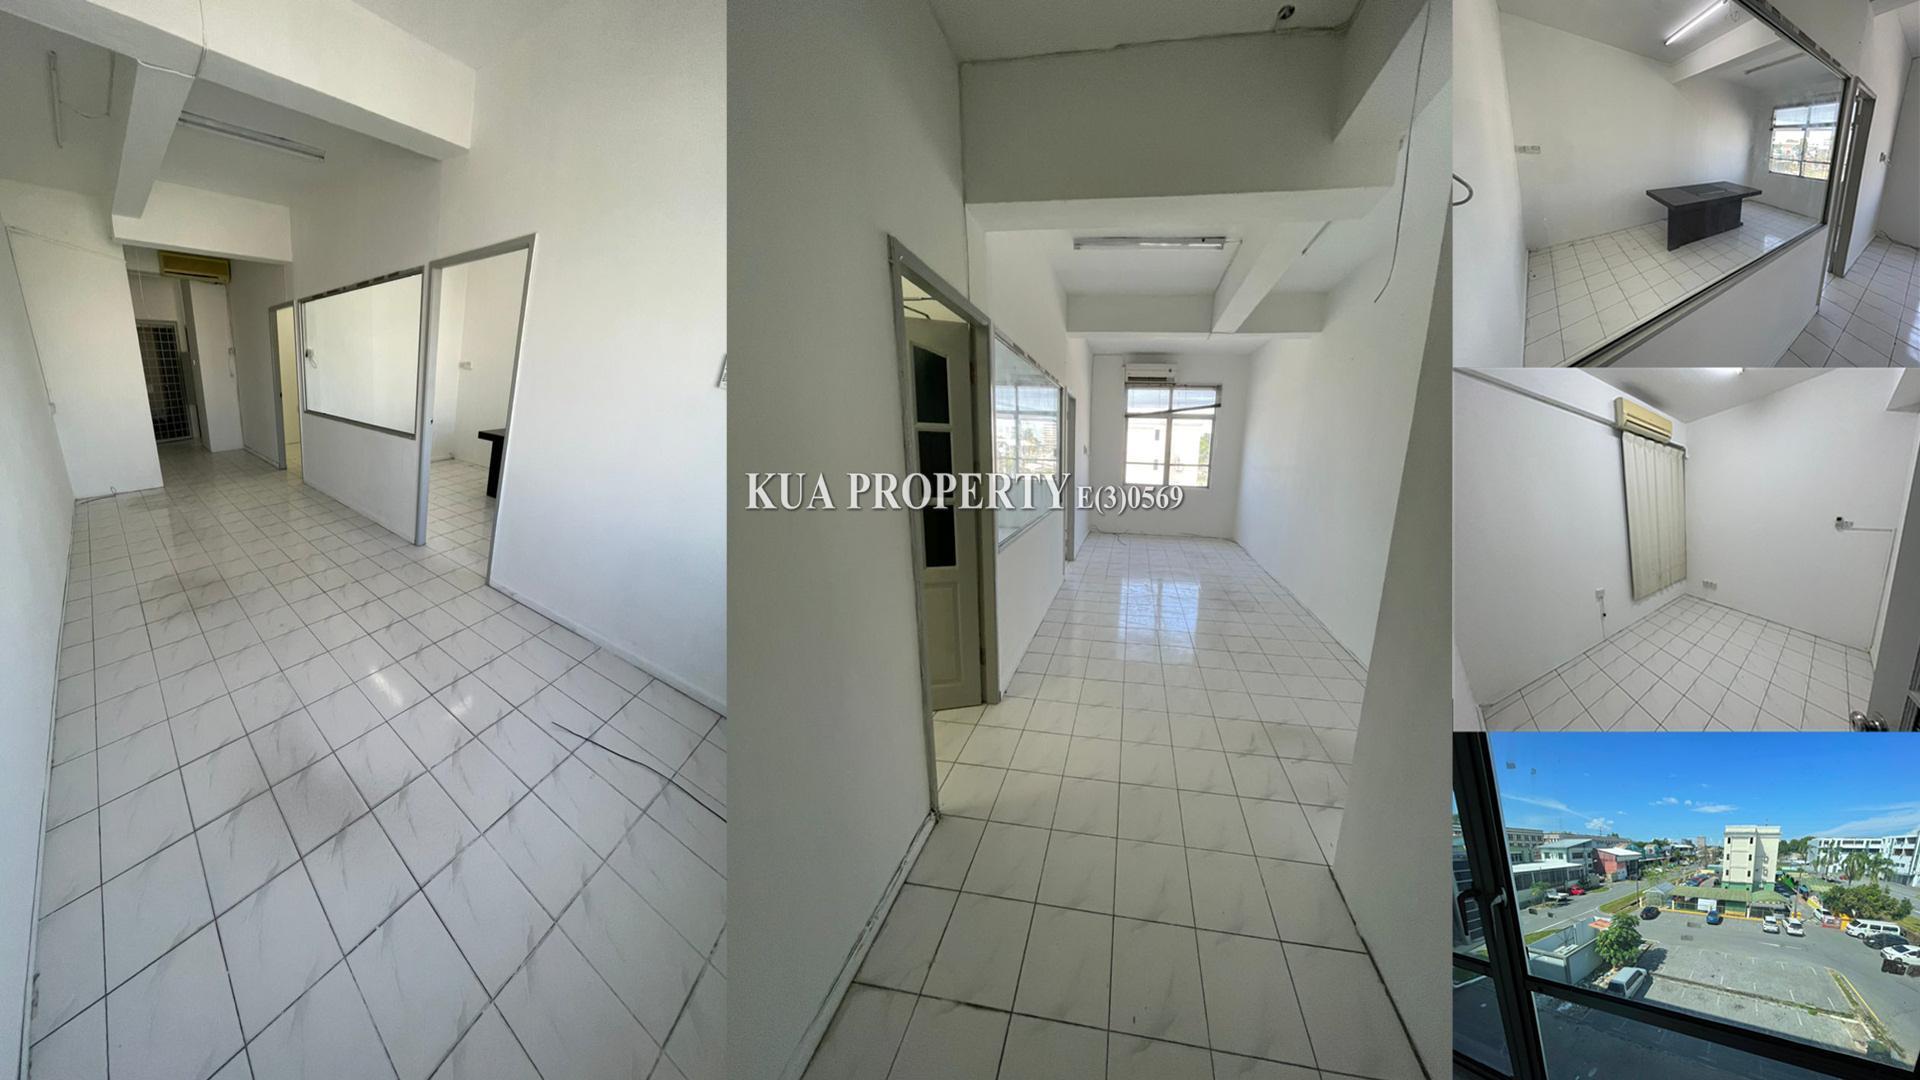 Yoshi Square 2nd Floor For Sale & For Rent! Located at Pending Kuching